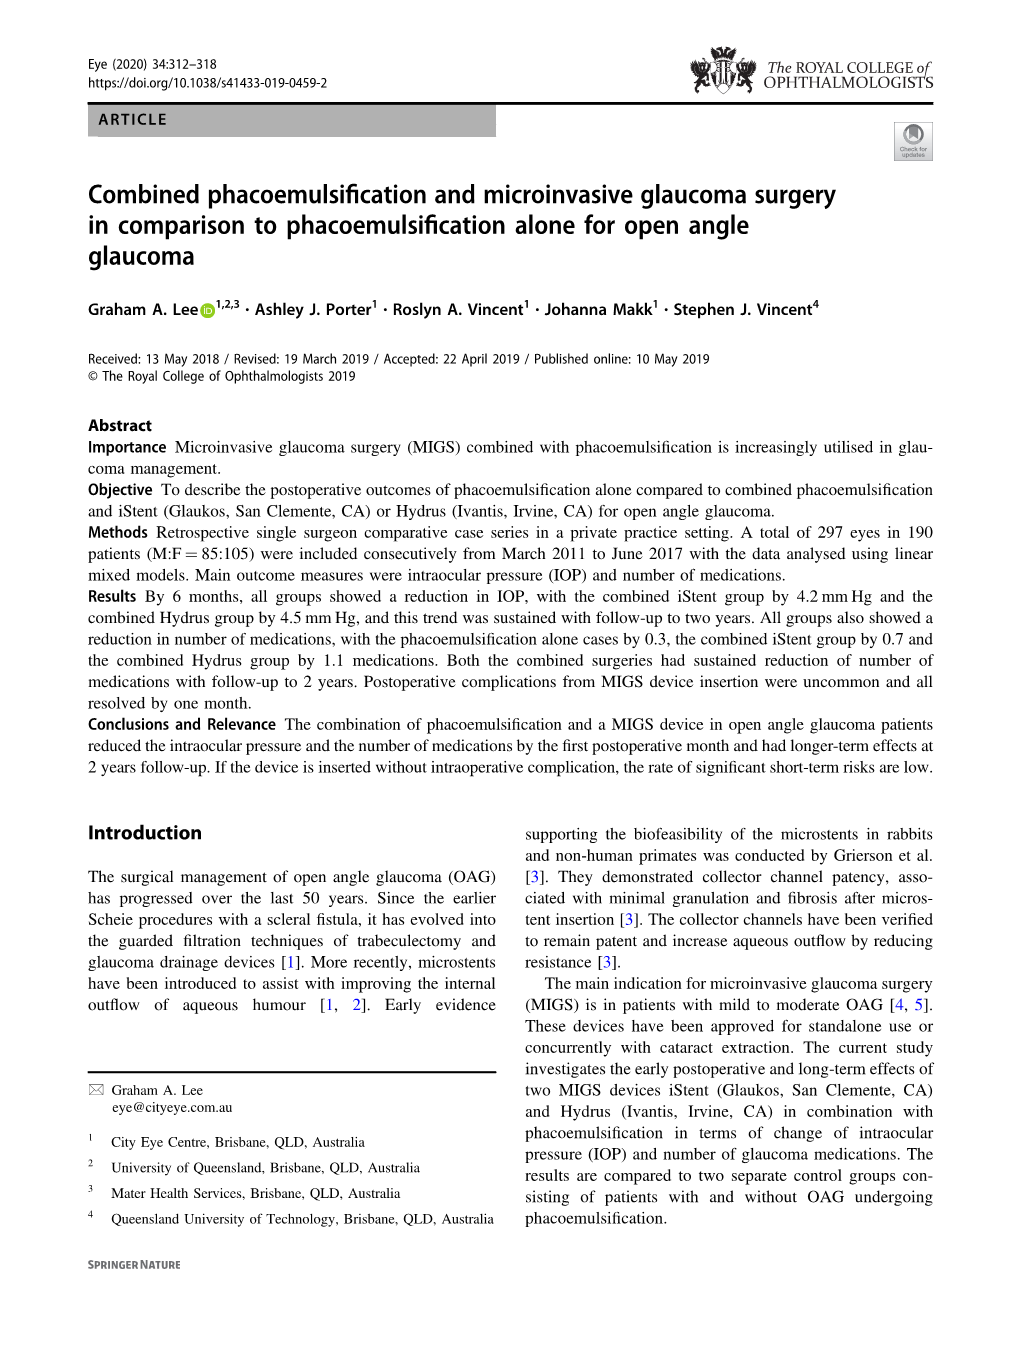 Combined Phacoemulsification and Microinvasive Glaucoma Surgery In